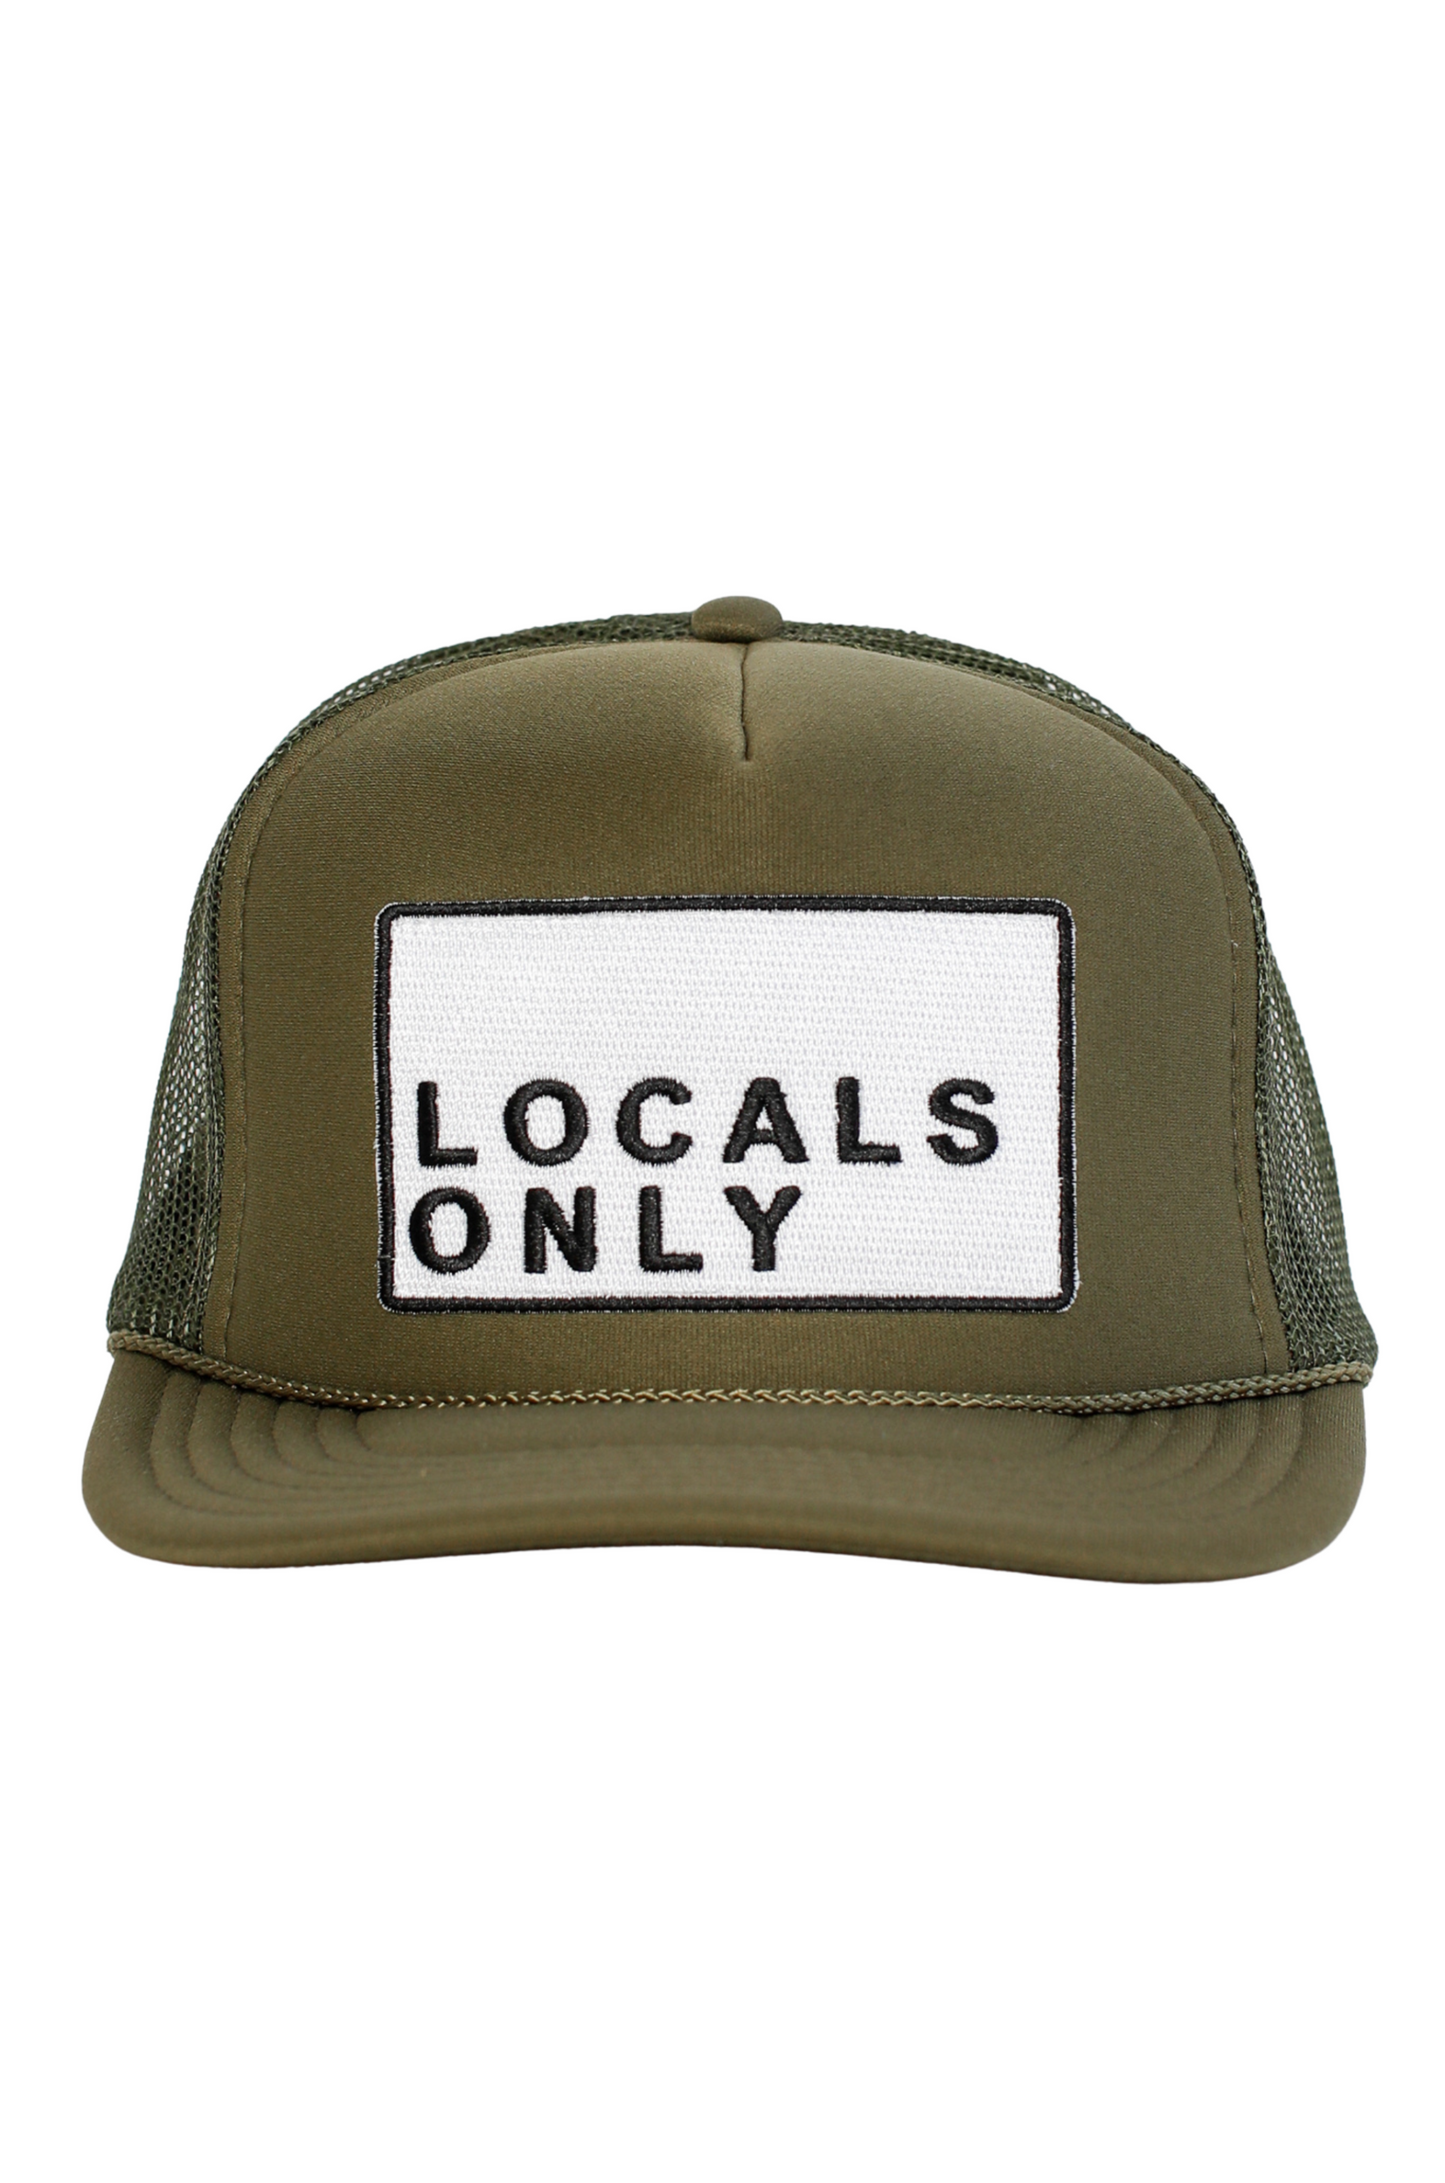 Locals Only Hat - Olive